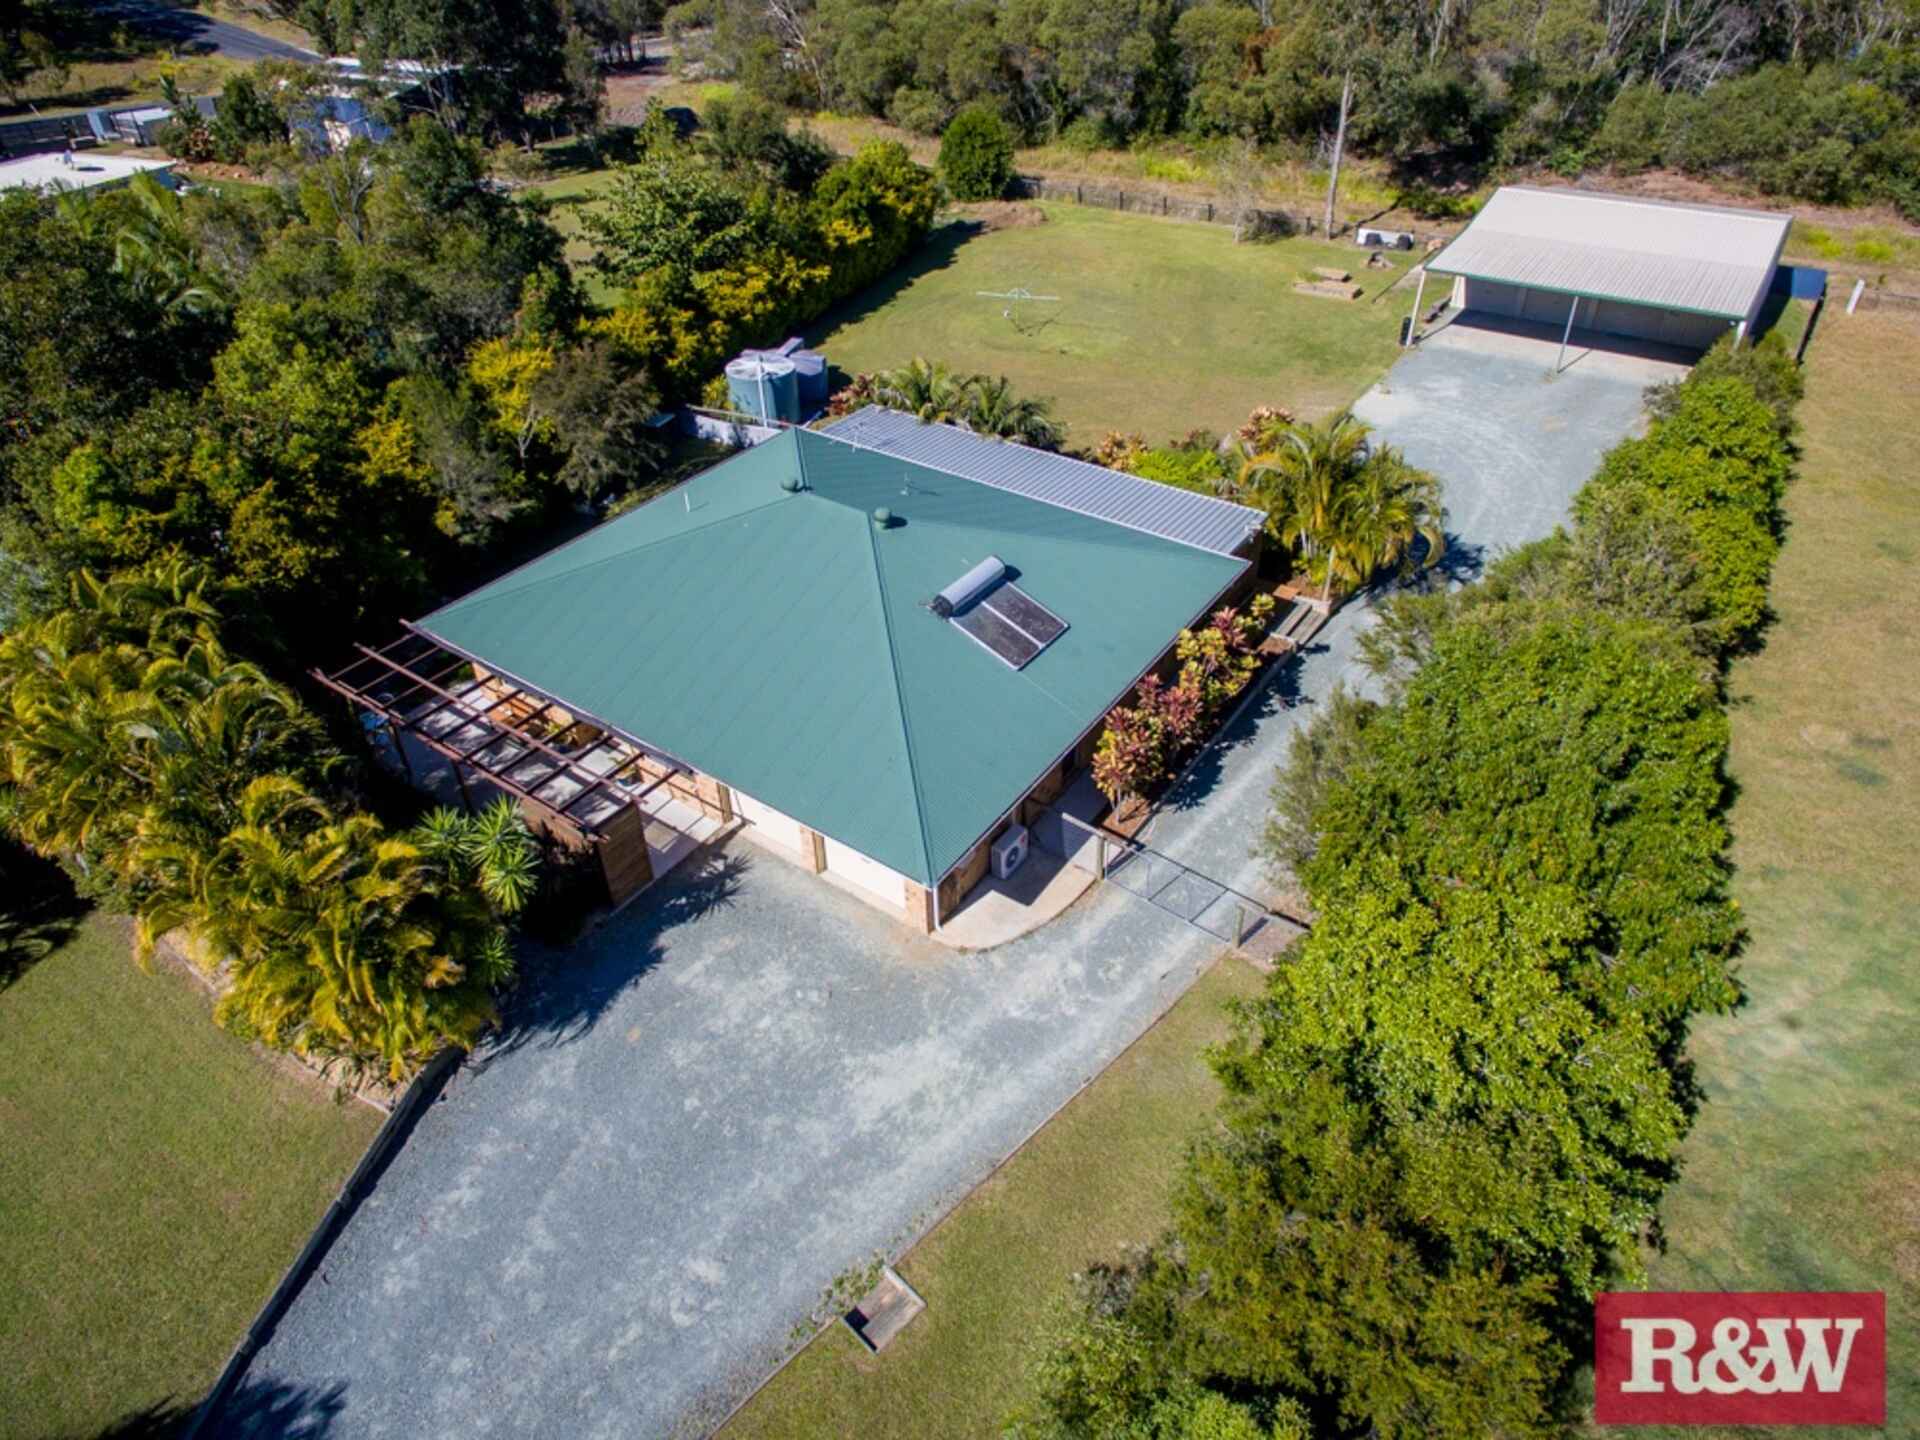 9 Clearwater Crescent Caboolture